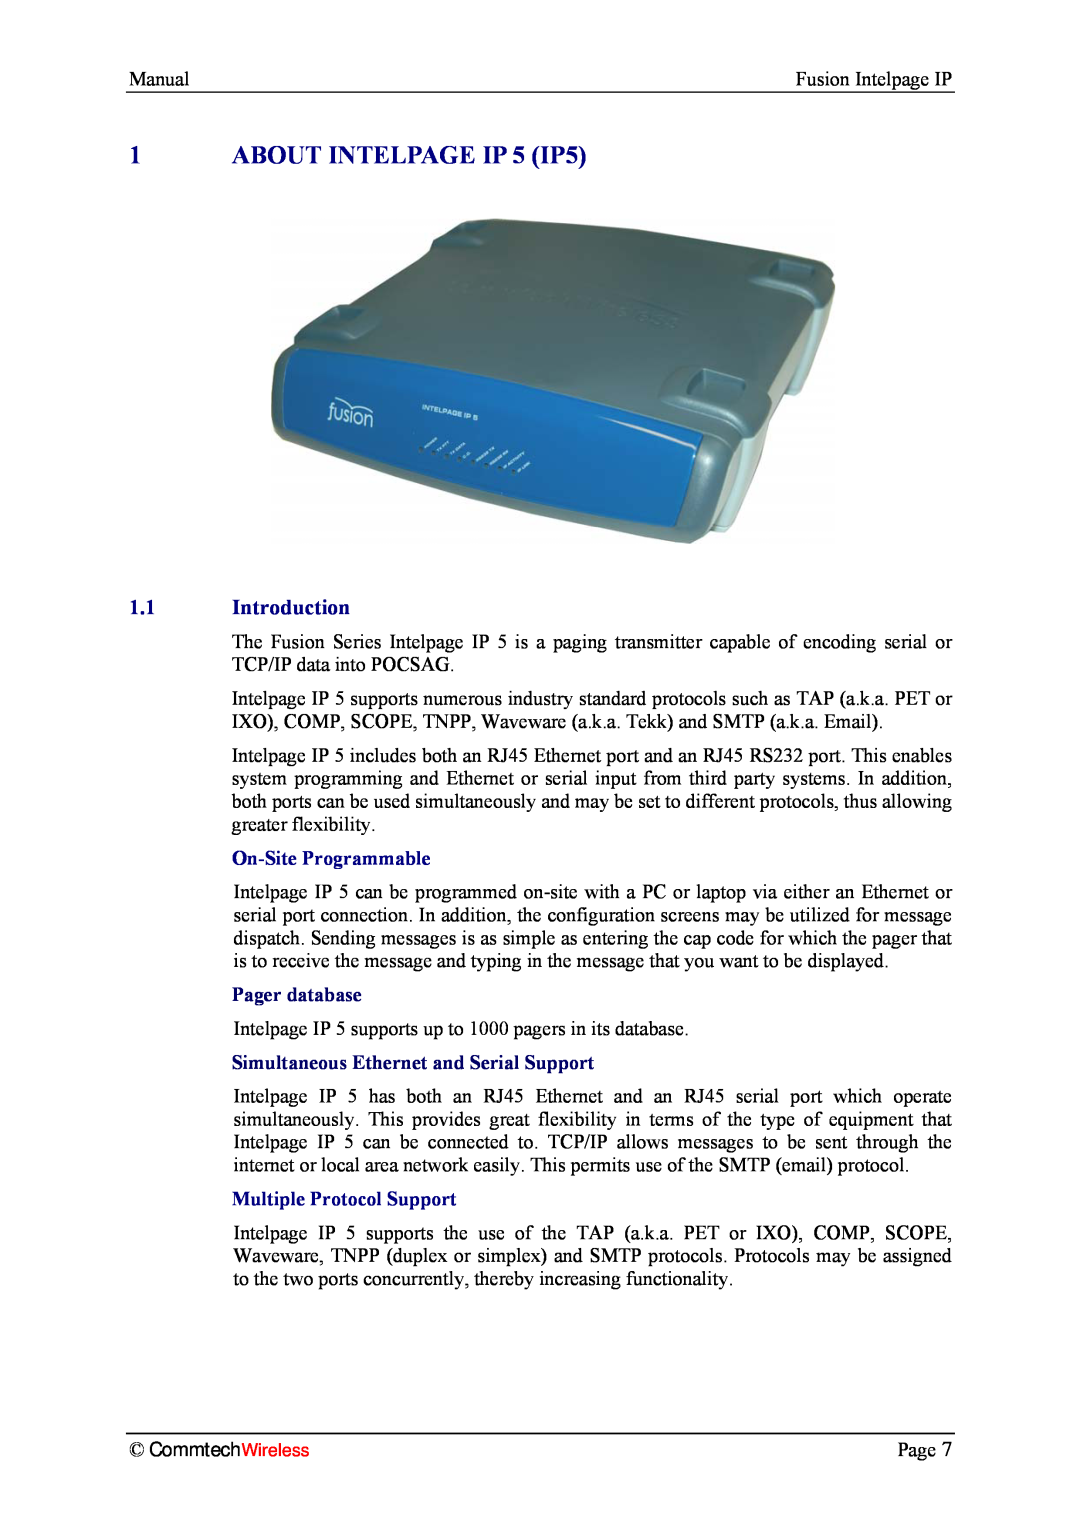 Fusion INTELPage IP 5 ABOUT INTELPAGE IP 5 IP5, 1.1Introduction, Pager database, Simultaneous Ethernet and Serial Support 